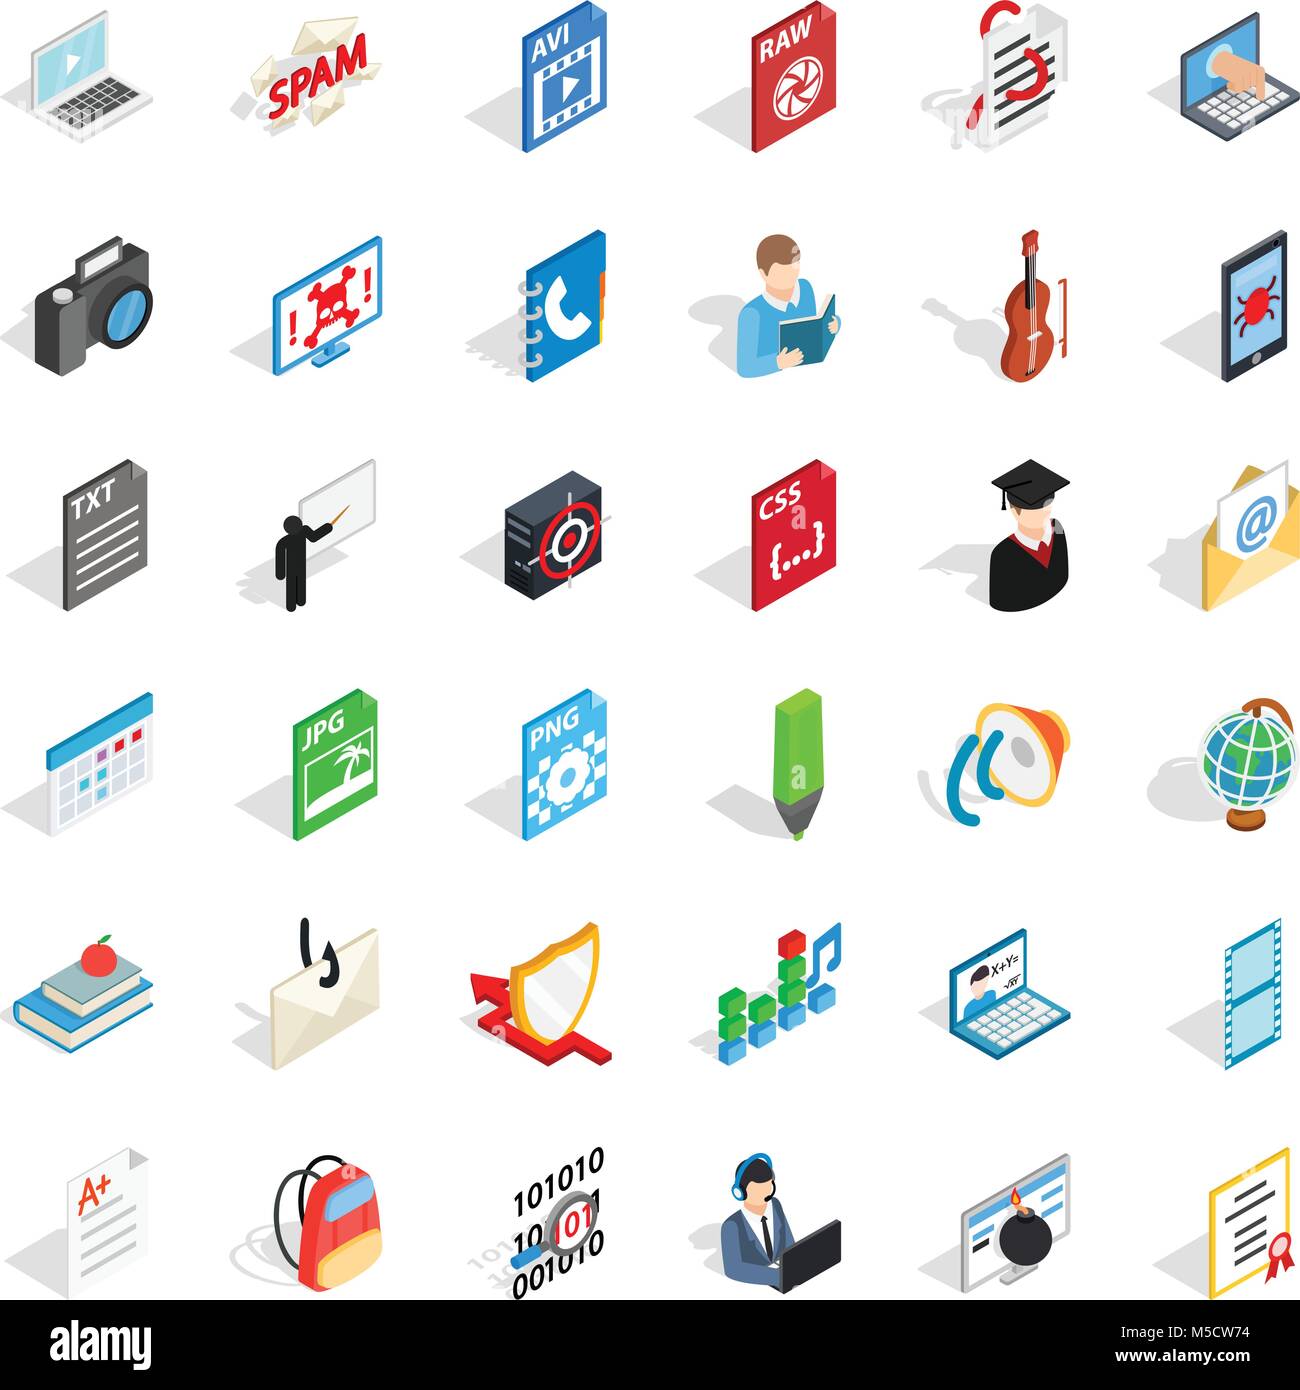 Quick guide icons set, isometric style Stock Vector